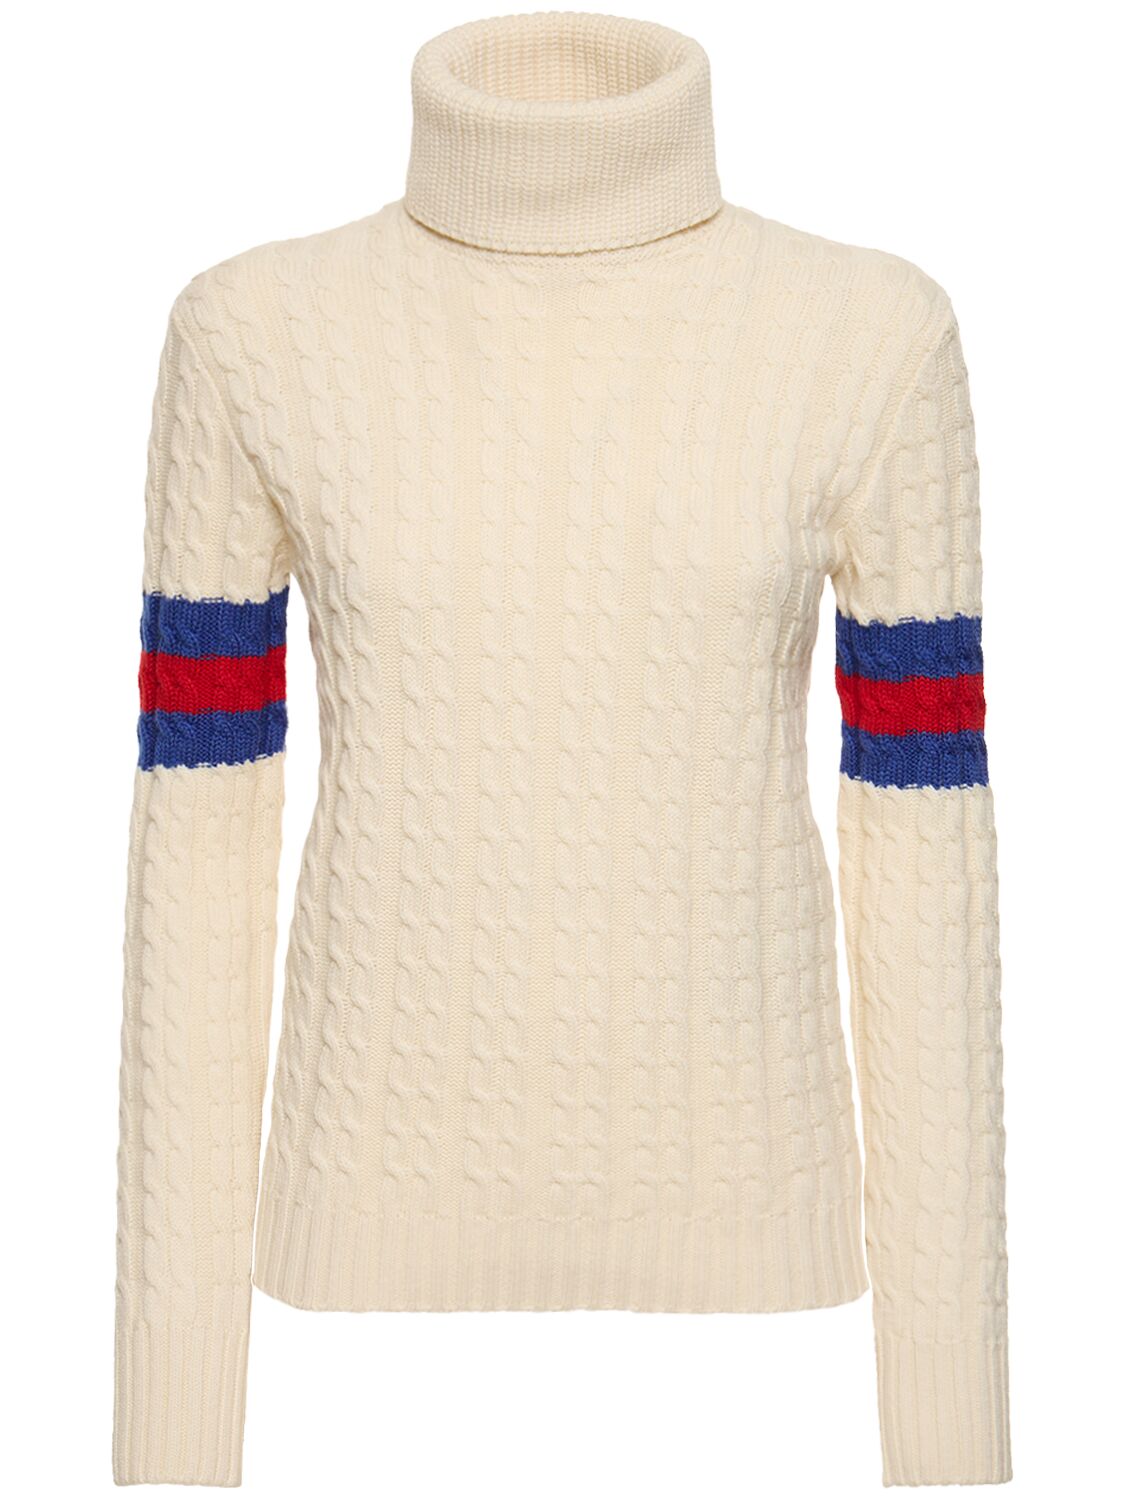 Image of Wool & Cashmere Cable Knit Sweater